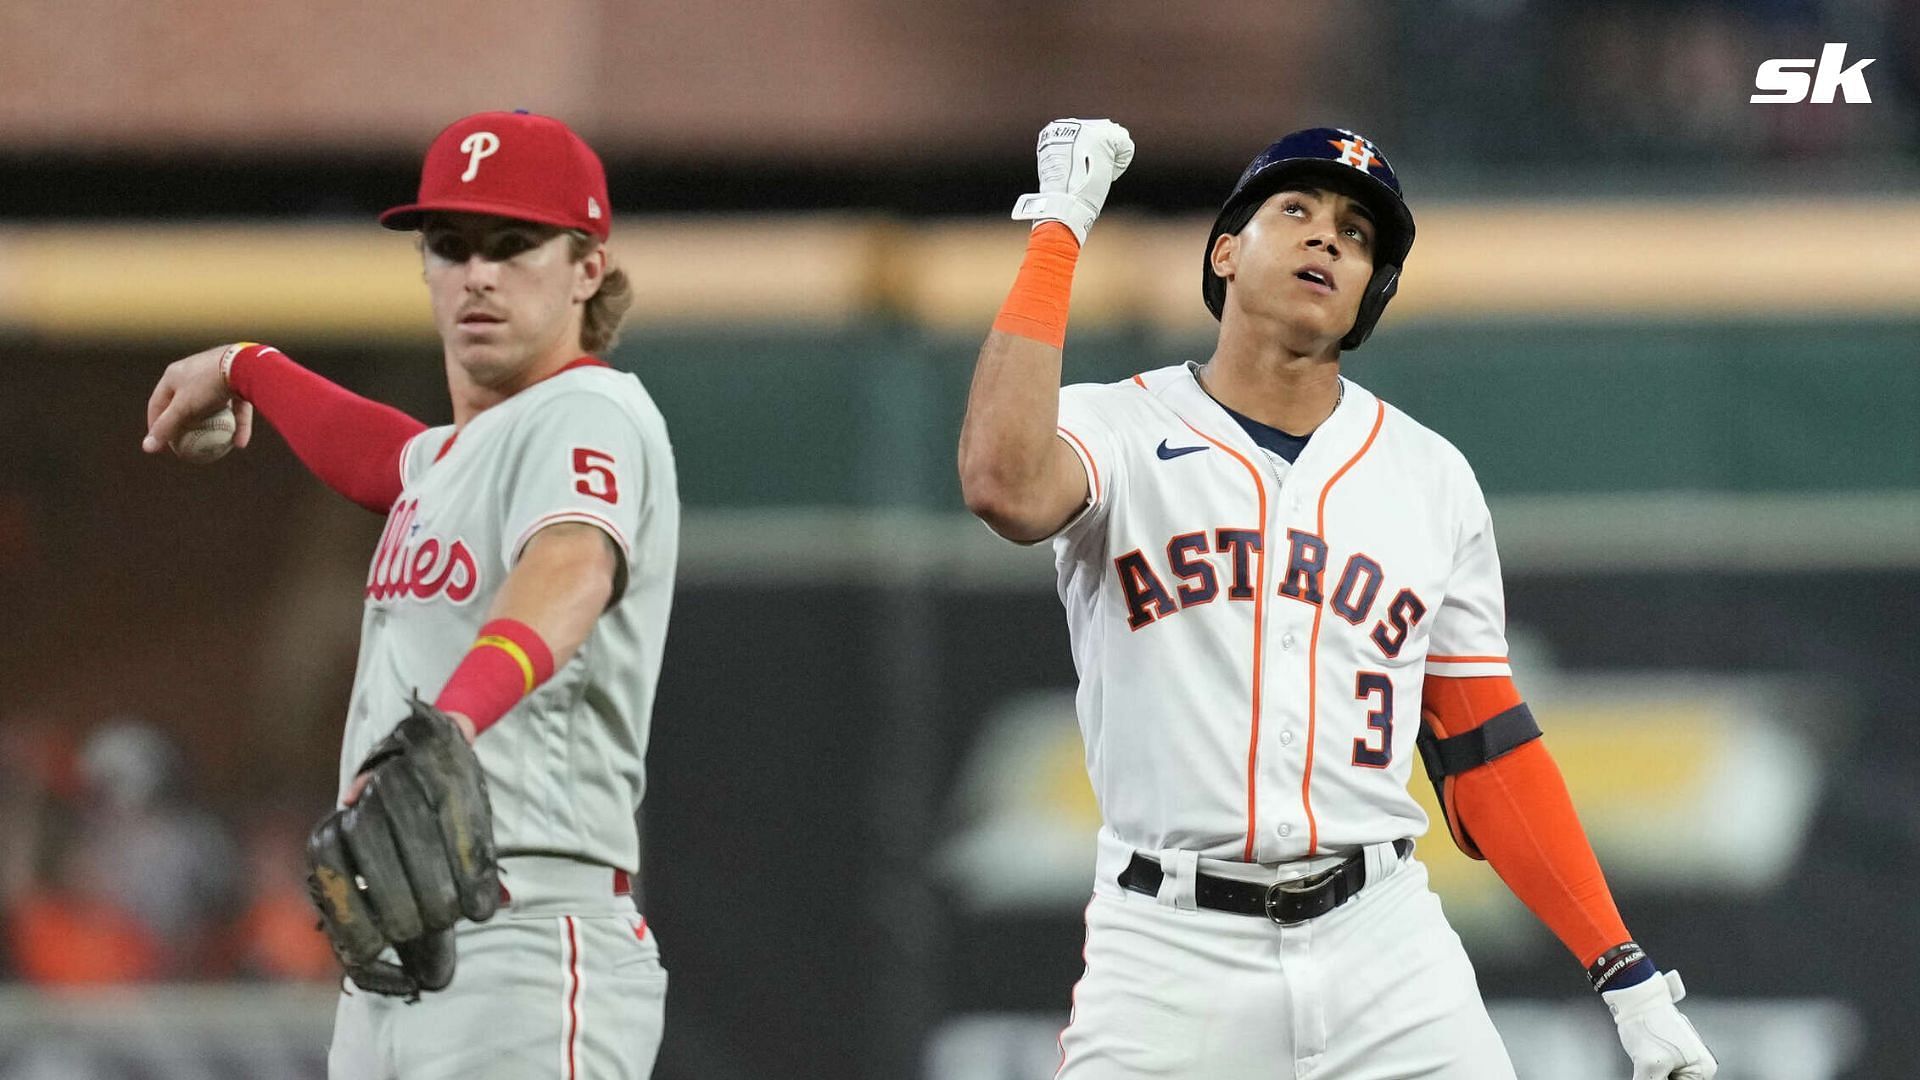 Houston Astros now leads the series 3-2 and is one game away from winning their first MLB championship since 2017.